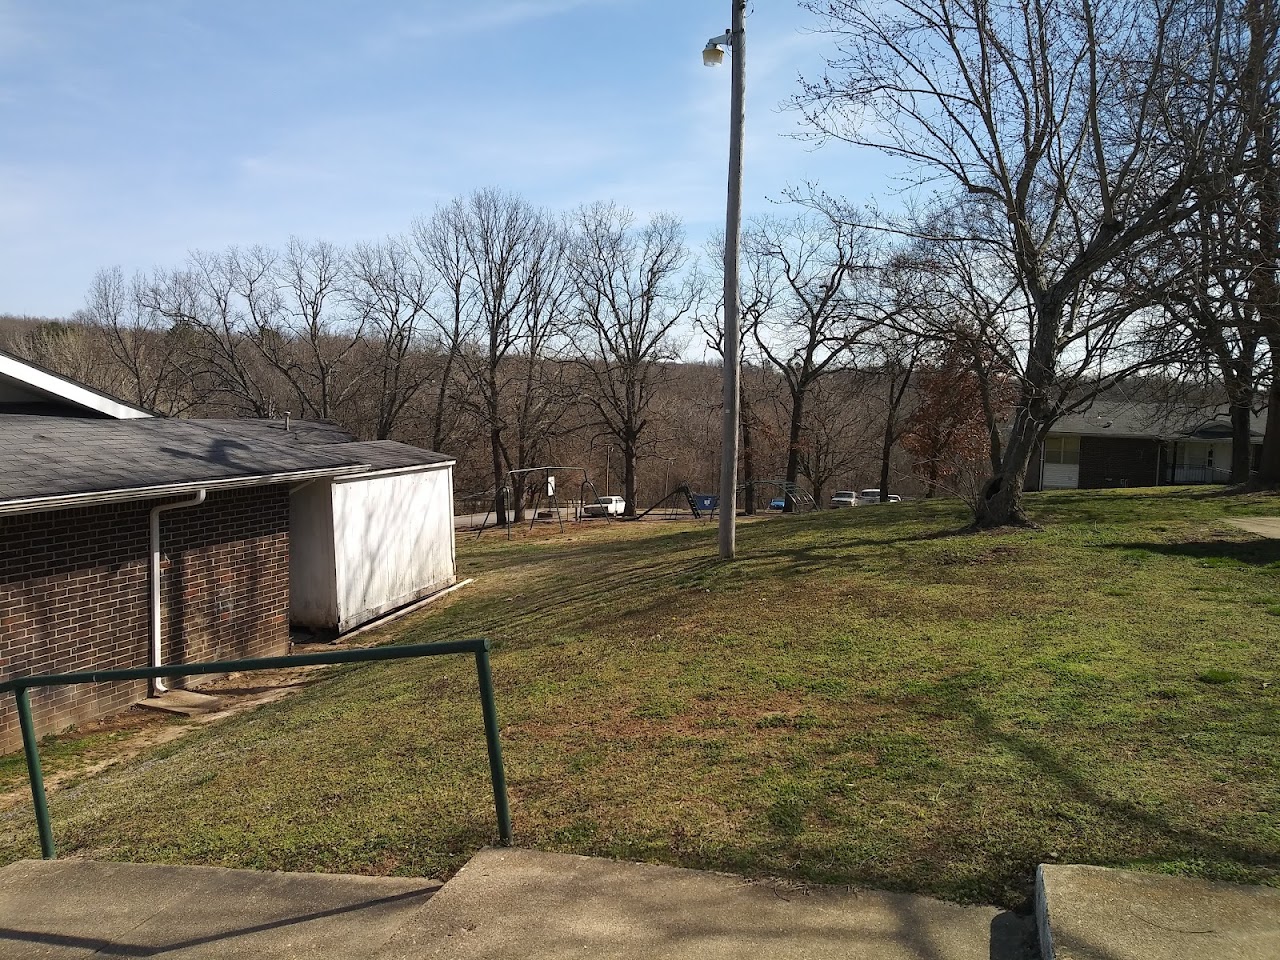 Photo of HERITAGE HEIGHTS APARTMENTS. Affordable housing located at 717 S SYCAMORE ST HARRISON, AR 72601